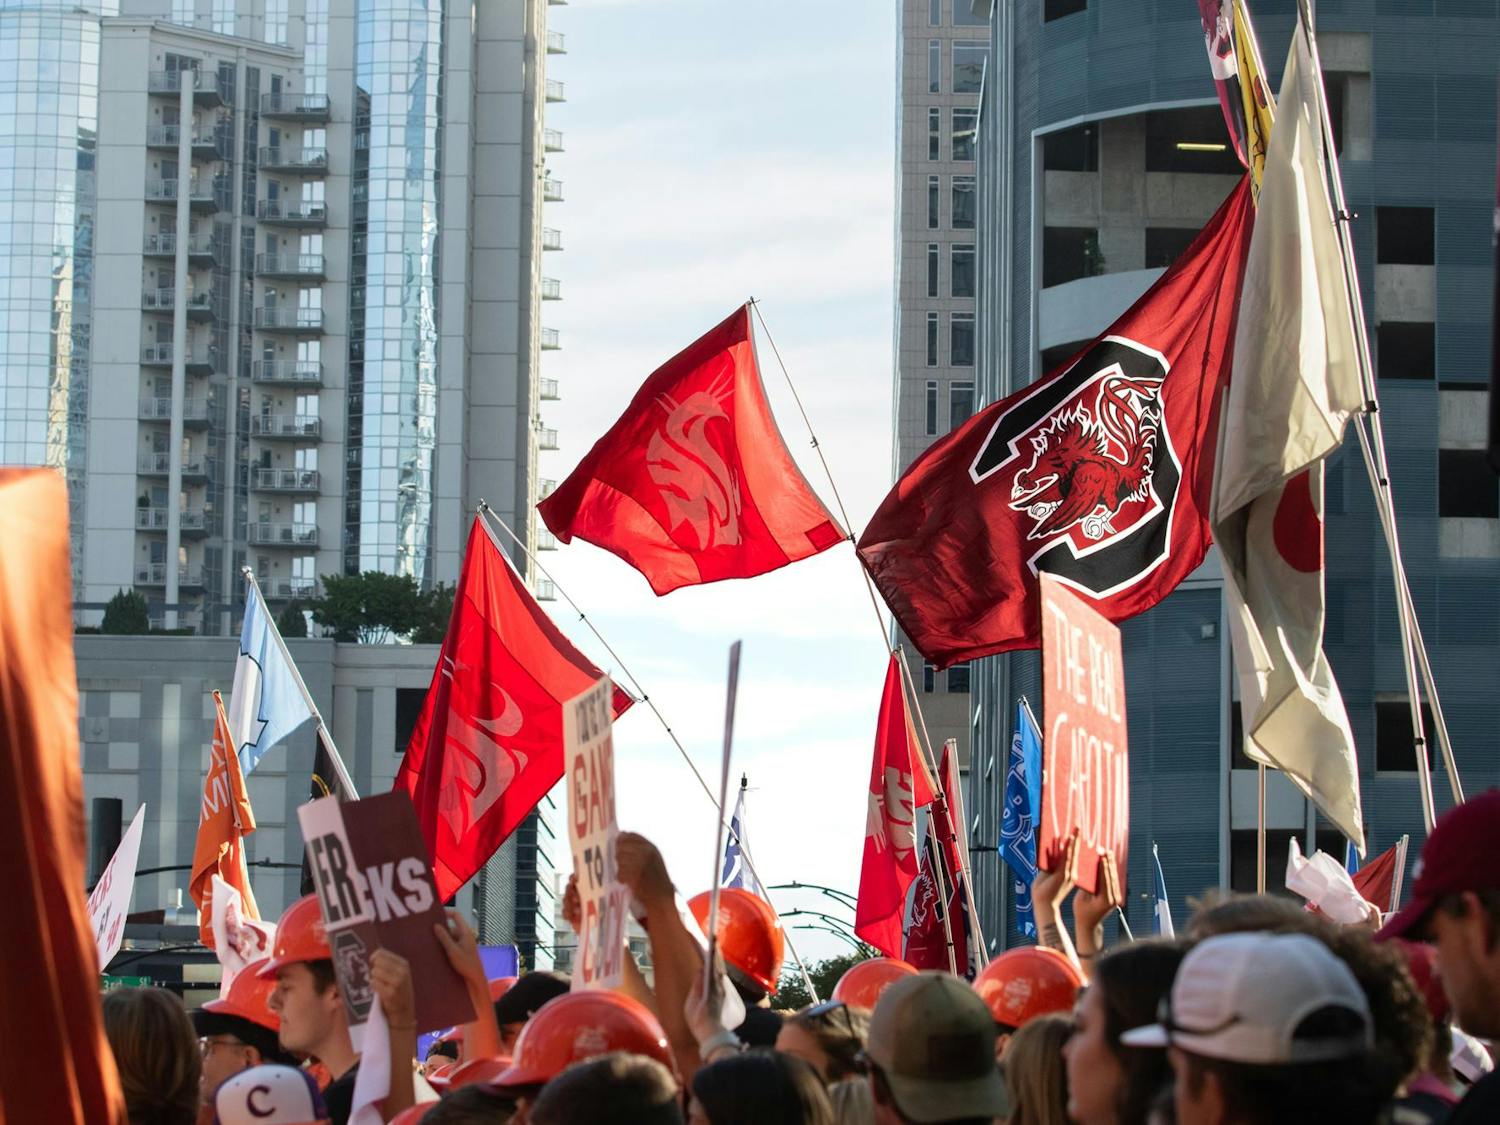 Fans gathered at Romare Bearden Park wave flags and hoist signs hoping to get on camera. The crowds gathered for College GameDay as early as 3 a.m. on Sept. 2, 2023.